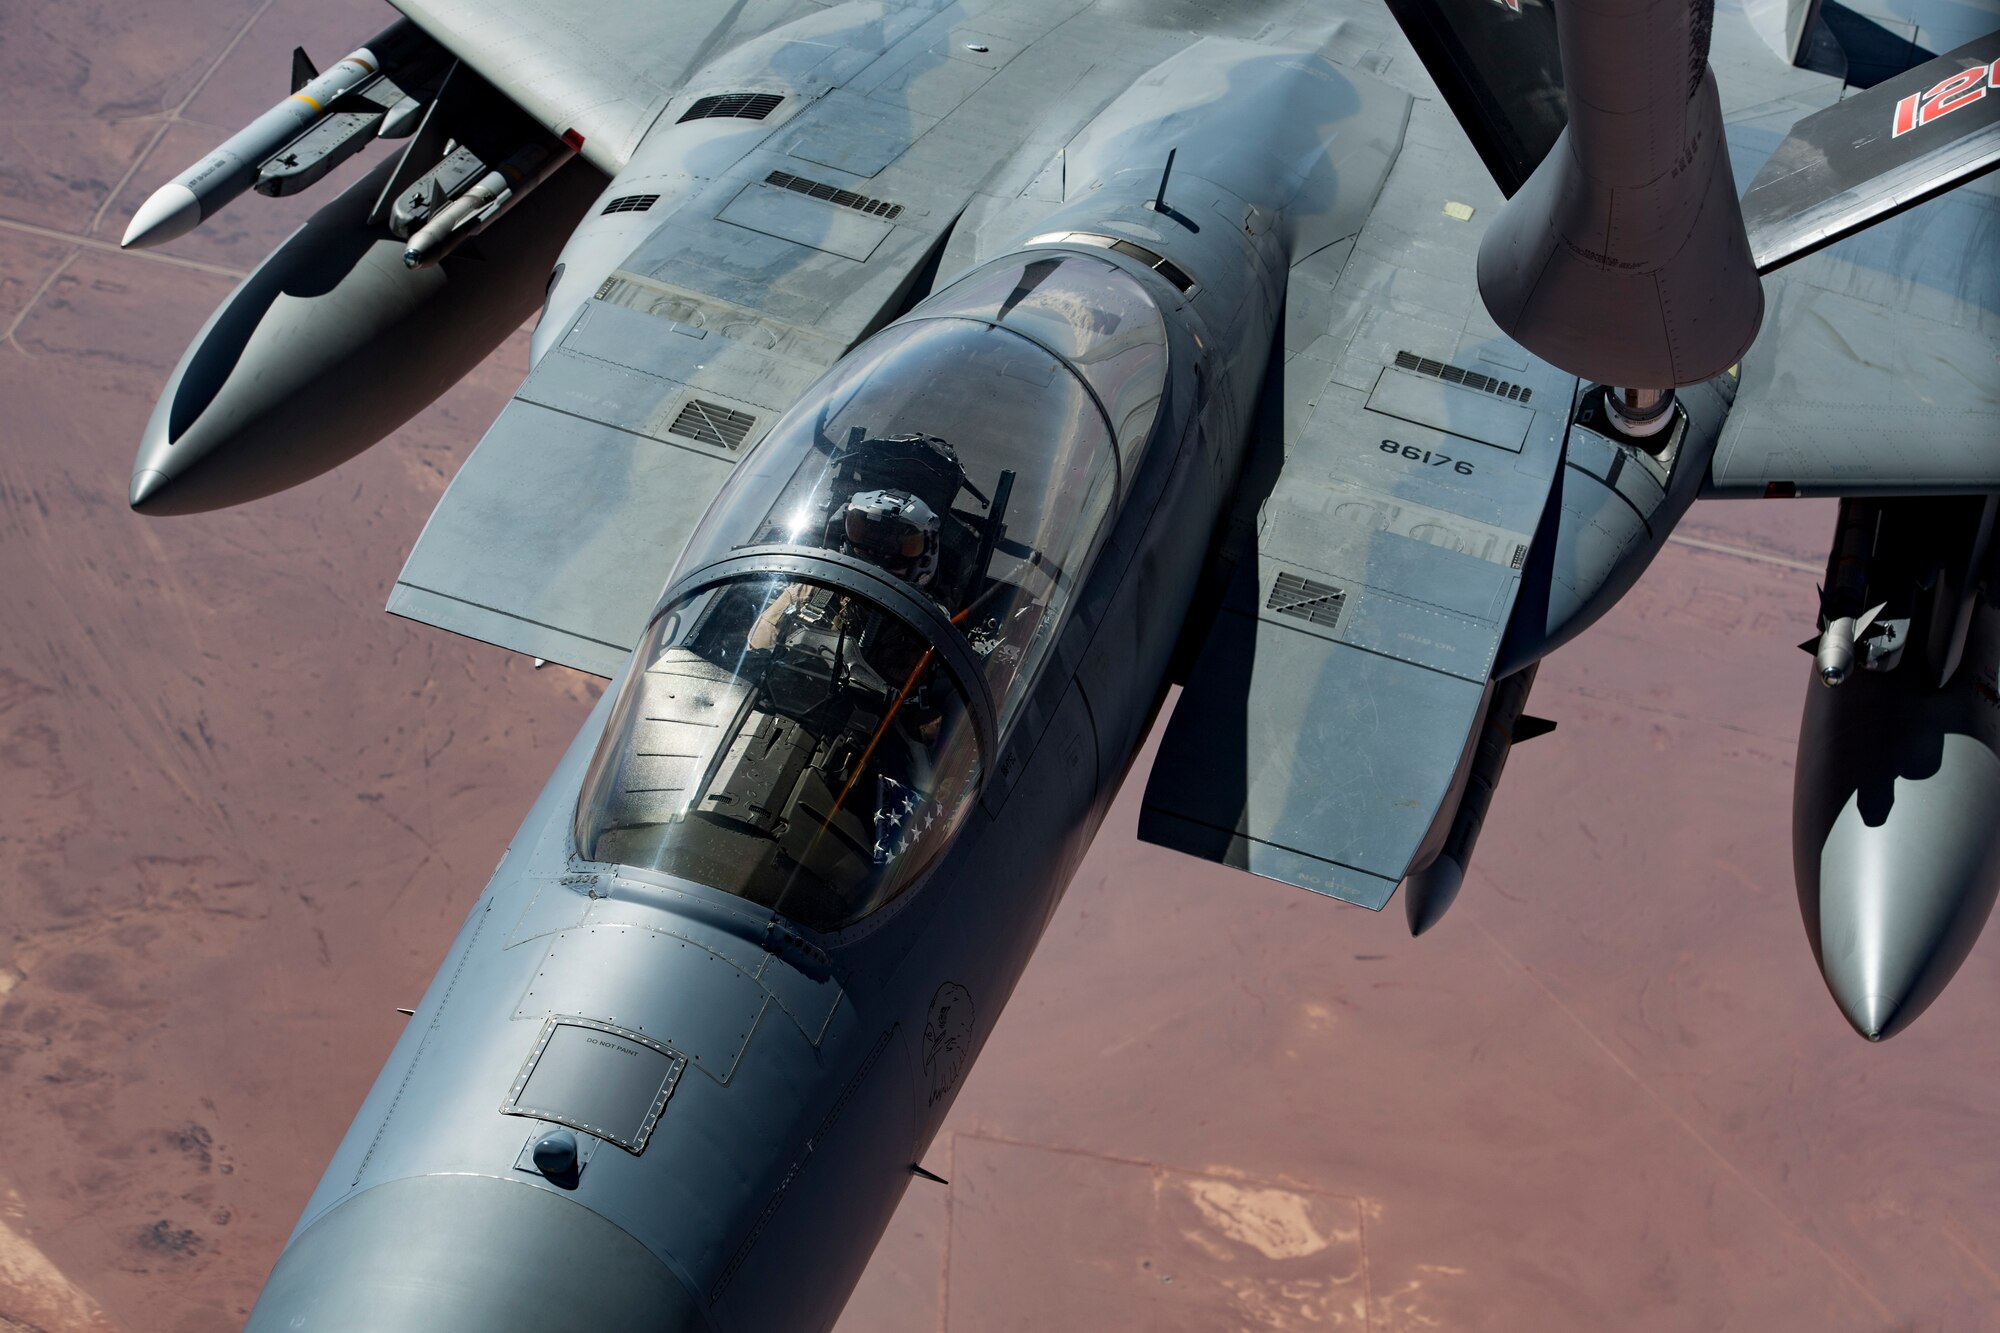 A U.S. Air Force F-15C Eagle is refueled by a KC-135 Stratotanker from the 28th Expeditionary Air Refueling Squadron while flying in support of Combined Joint Task Force – Operation Inherent Resolve Feb. 11, 2019. The tactical fighters add an additional layer of support to coalition forces on the ground. U.S. Air Forces Central Command Airmen, Joint personnel Coalition partners stand ready to defend our forces from any threat. (U.S. Air Force photo by Staff Sgt. Clayton Cupit)